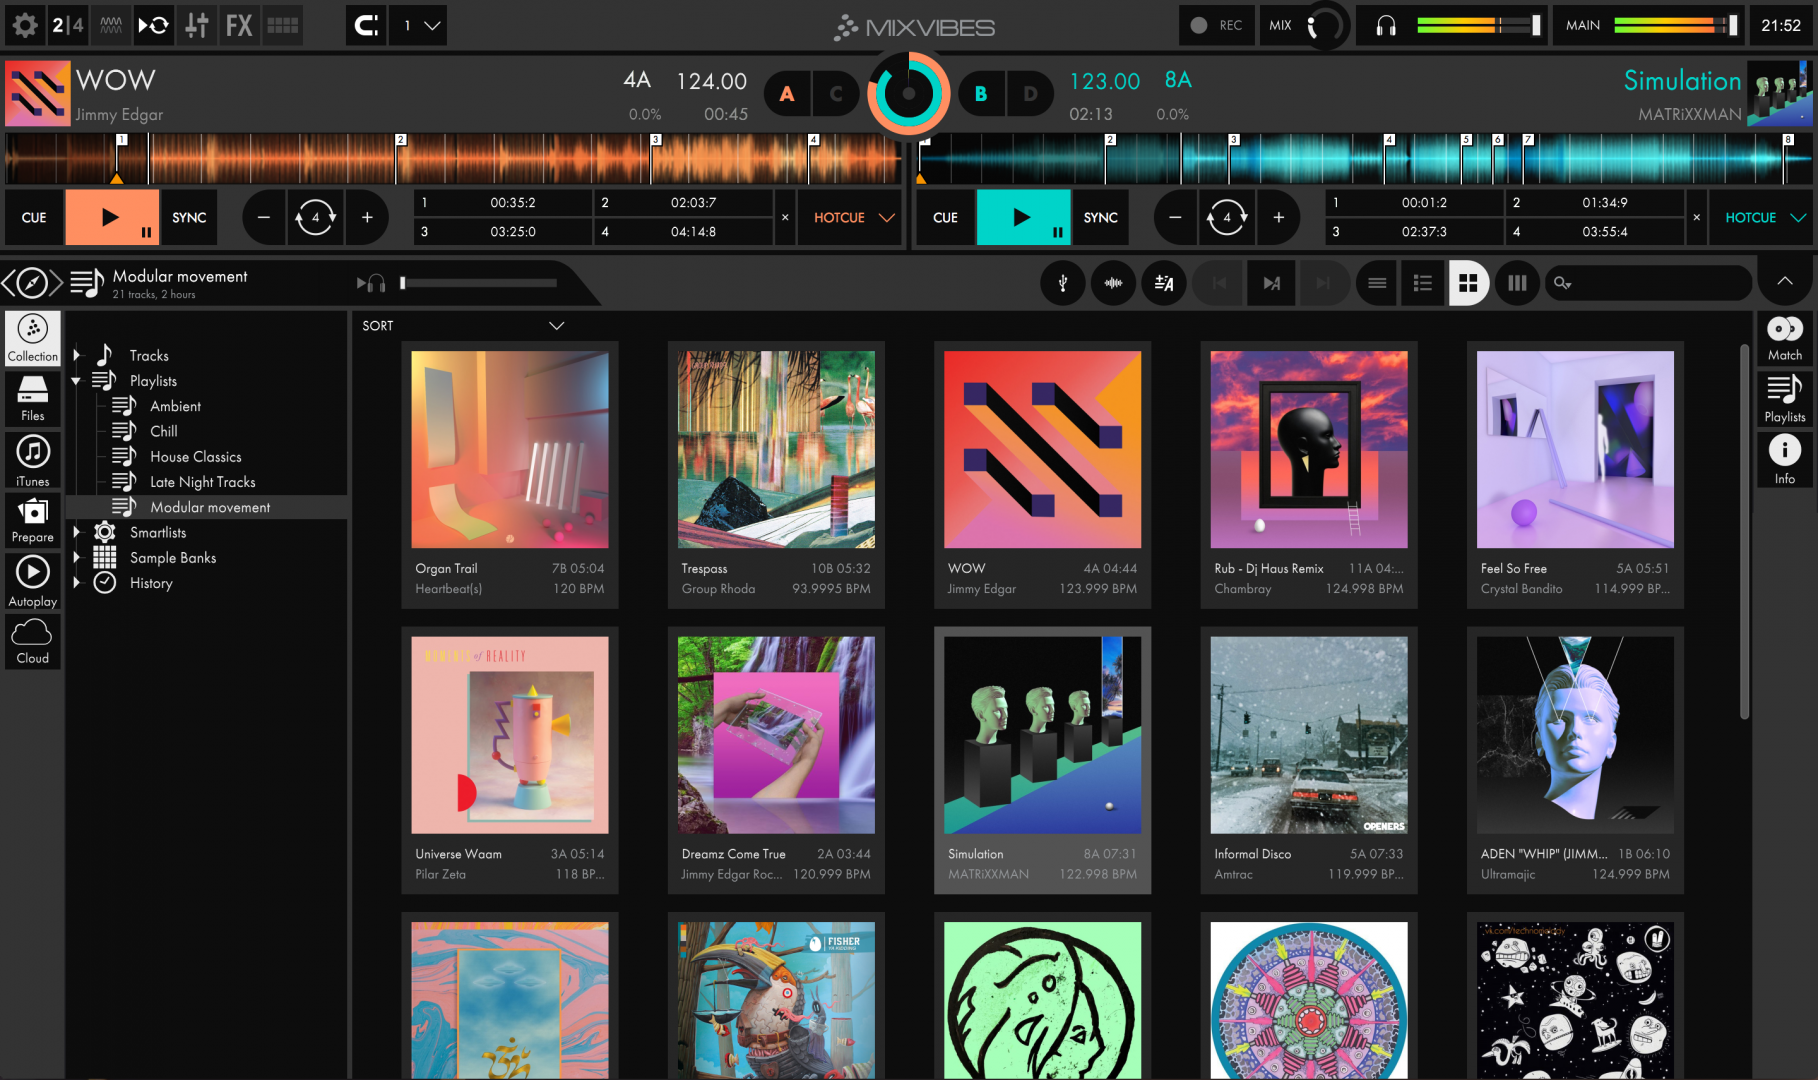 Mixvibes Cross DJ 4 Launched, Brings New Customisable Interface